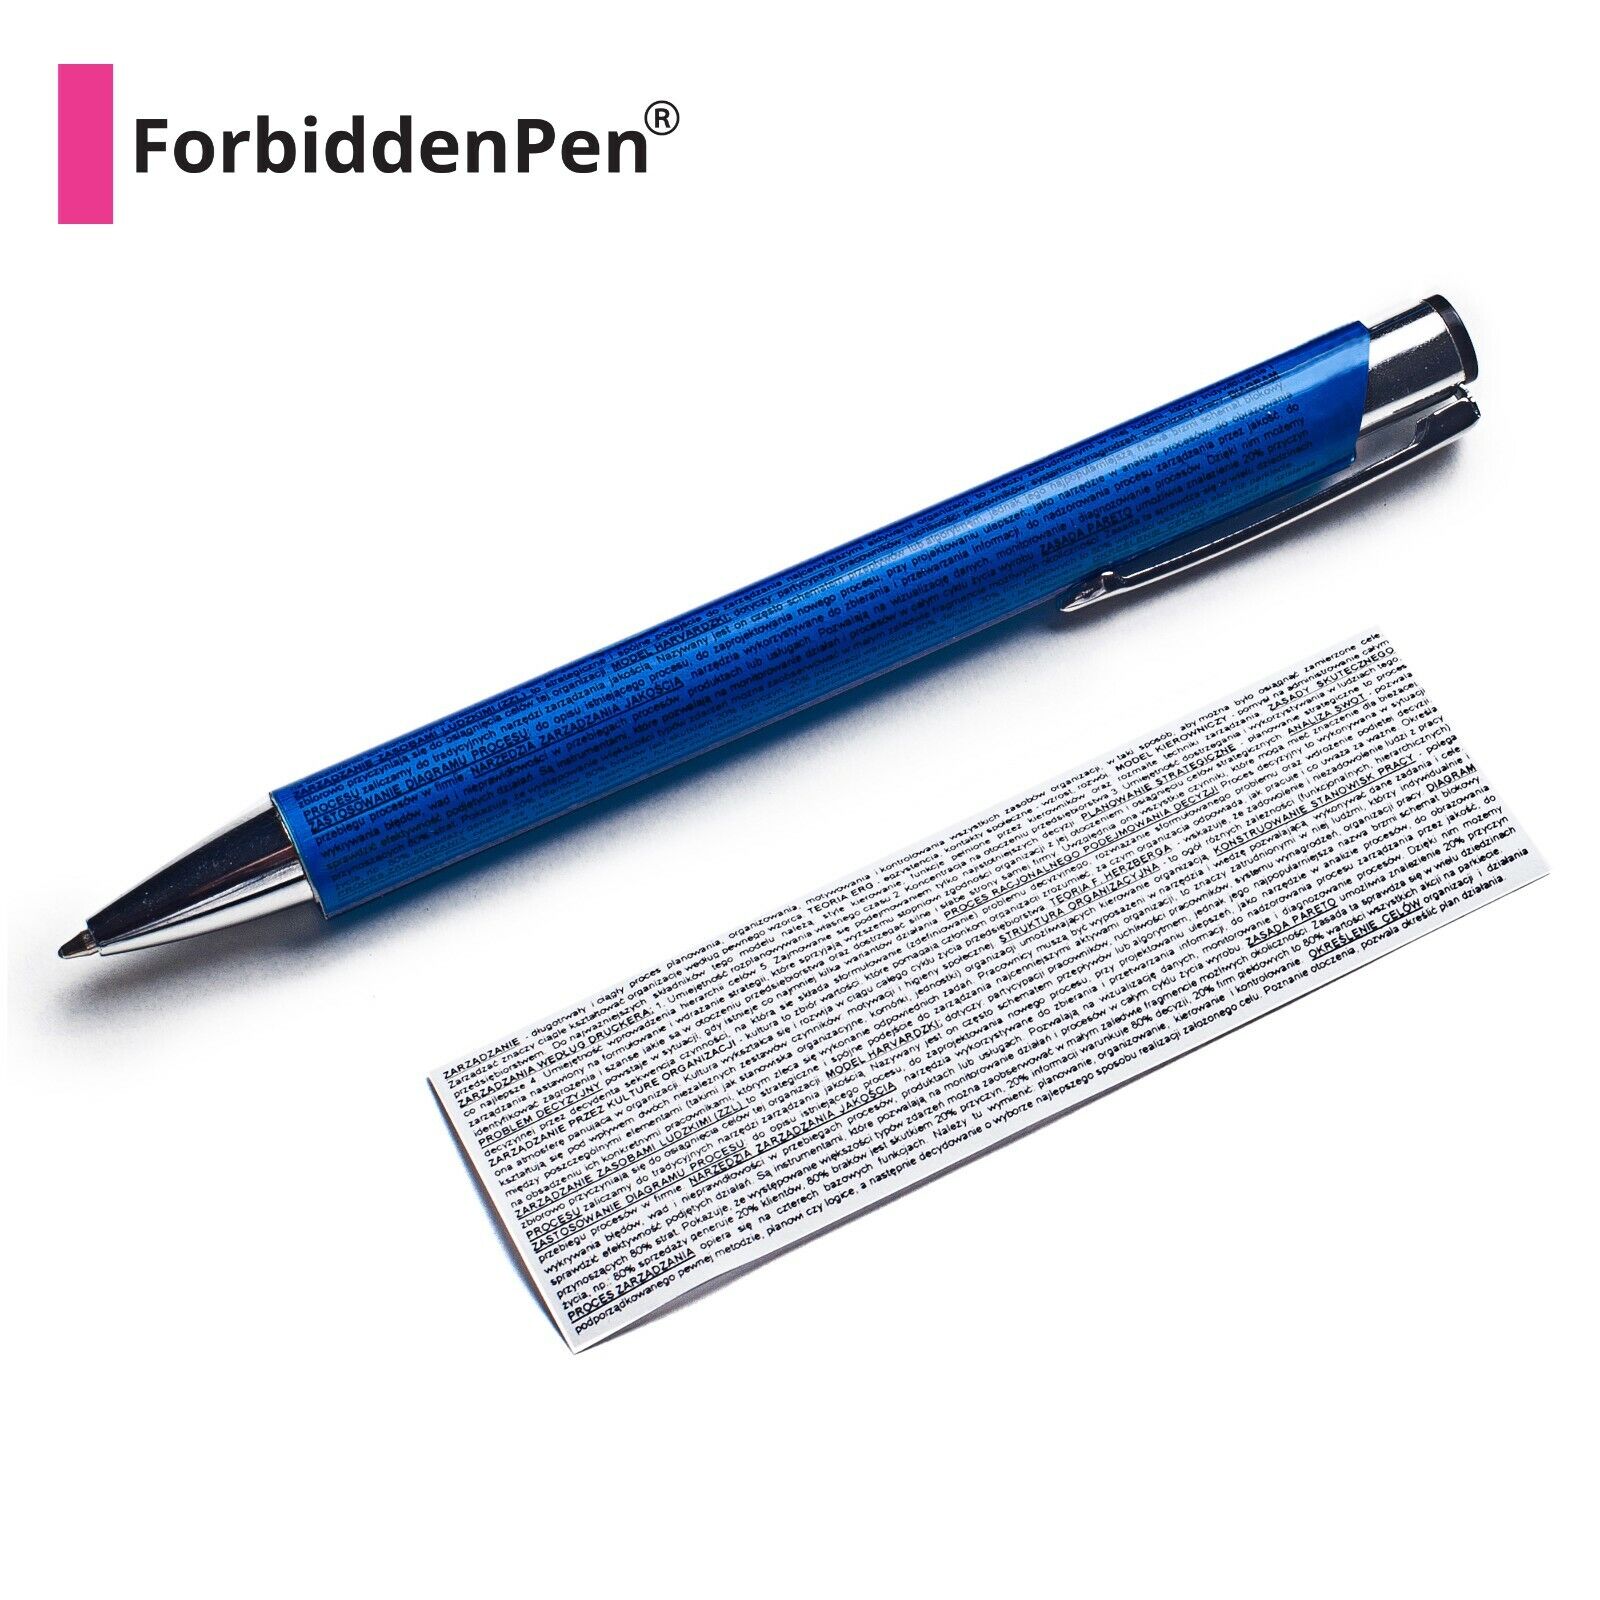 CHEAT PEN, Cheating Pen for exams, tests, notes, INVISIBLE CHEAT, FORBIDDEN PEN®